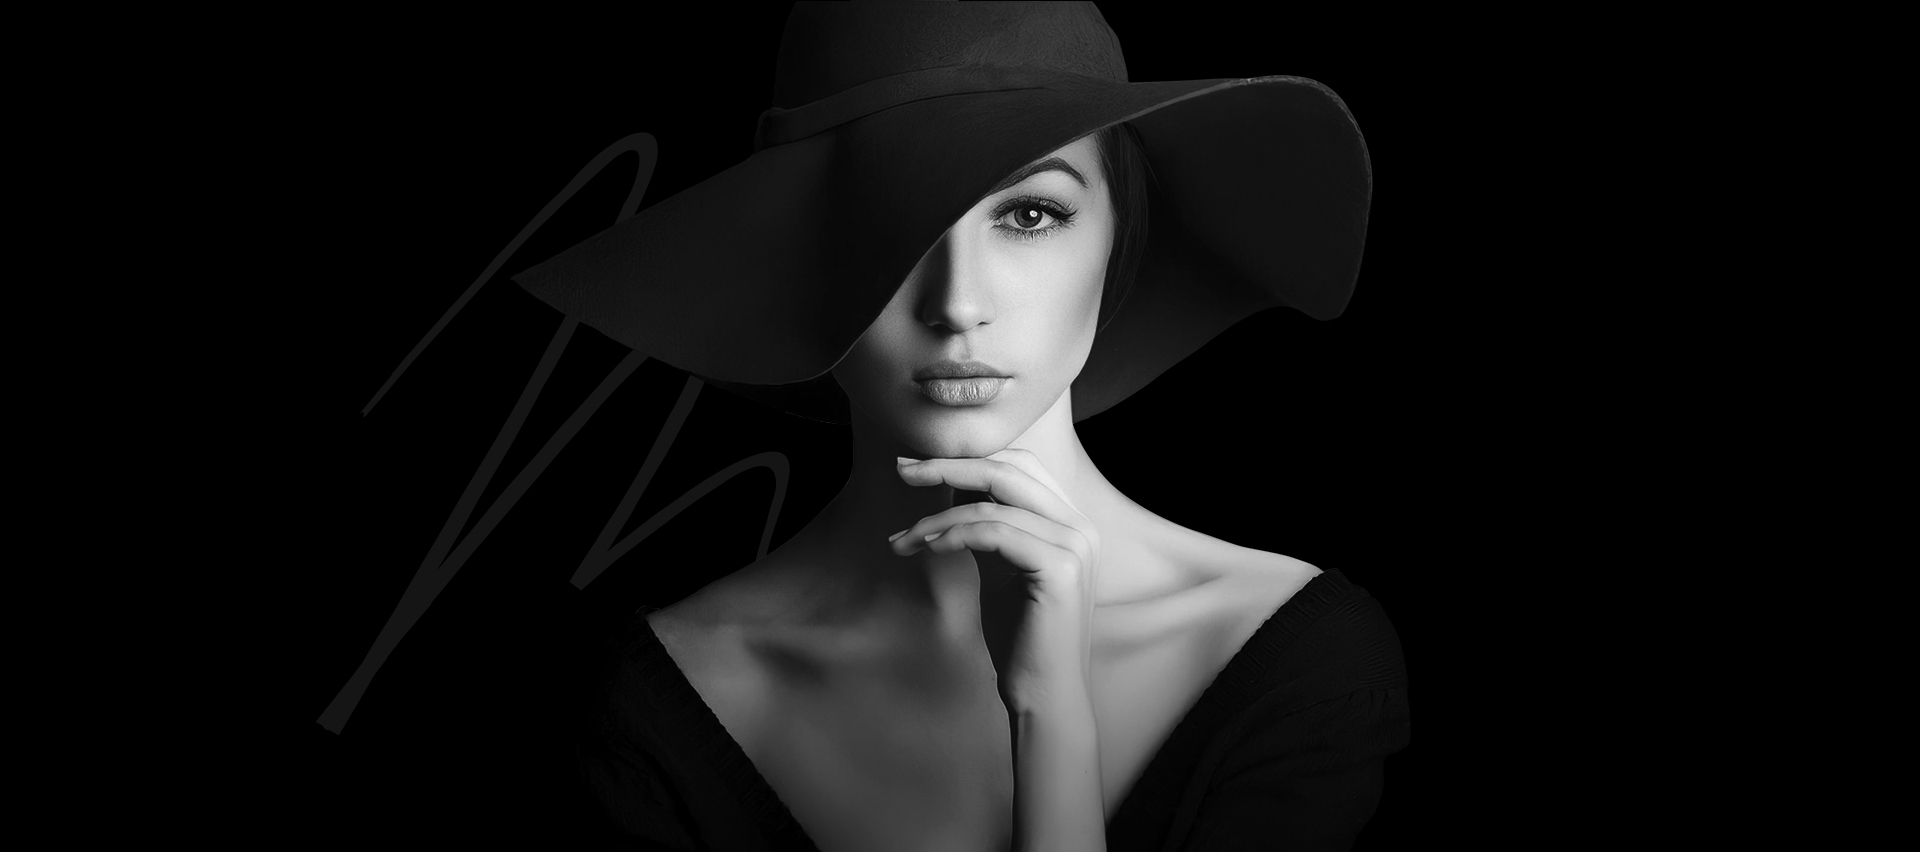 stock image of model with large hat